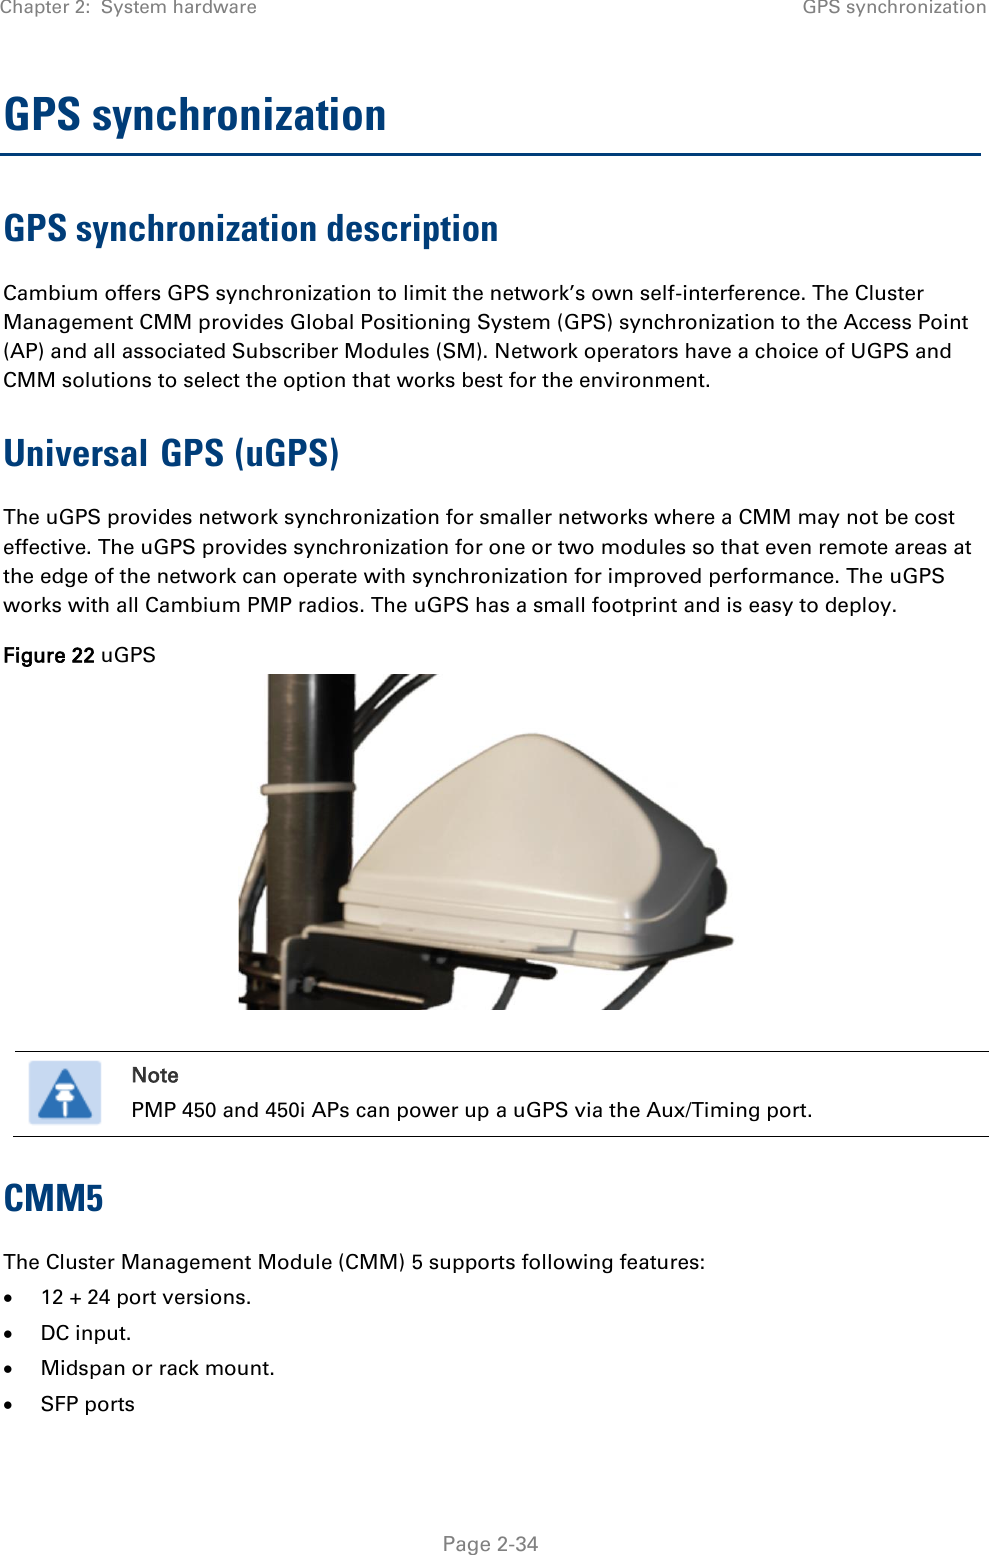 Chapter 2:  System hardware GPS synchronization   Page 2-34 GPS synchronization GPS synchronization description Cambium offers GPS synchronization to limit the network’s own self-interference. The Cluster Management CMM provides Global Positioning System (GPS) synchronization to the Access Point (AP) and all associated Subscriber Modules (SM). Network operators have a choice of UGPS and CMM solutions to select the option that works best for the environment. Universal GPS (uGPS) The uGPS provides network synchronization for smaller networks where a CMM may not be cost effective. The uGPS provides synchronization for one or two modules so that even remote areas at the edge of the network can operate with synchronization for improved performance. The uGPS works with all Cambium PMP radios. The uGPS has a small footprint and is easy to deploy. Figure 22 uGPS    Note PMP 450 and 450i APs can power up a uGPS via the Aux/Timing port. CMM5  The Cluster Management Module (CMM) 5 supports following features:   12 + 24 port versions.  DC input.  Midspan or rack mount.  SFP ports 